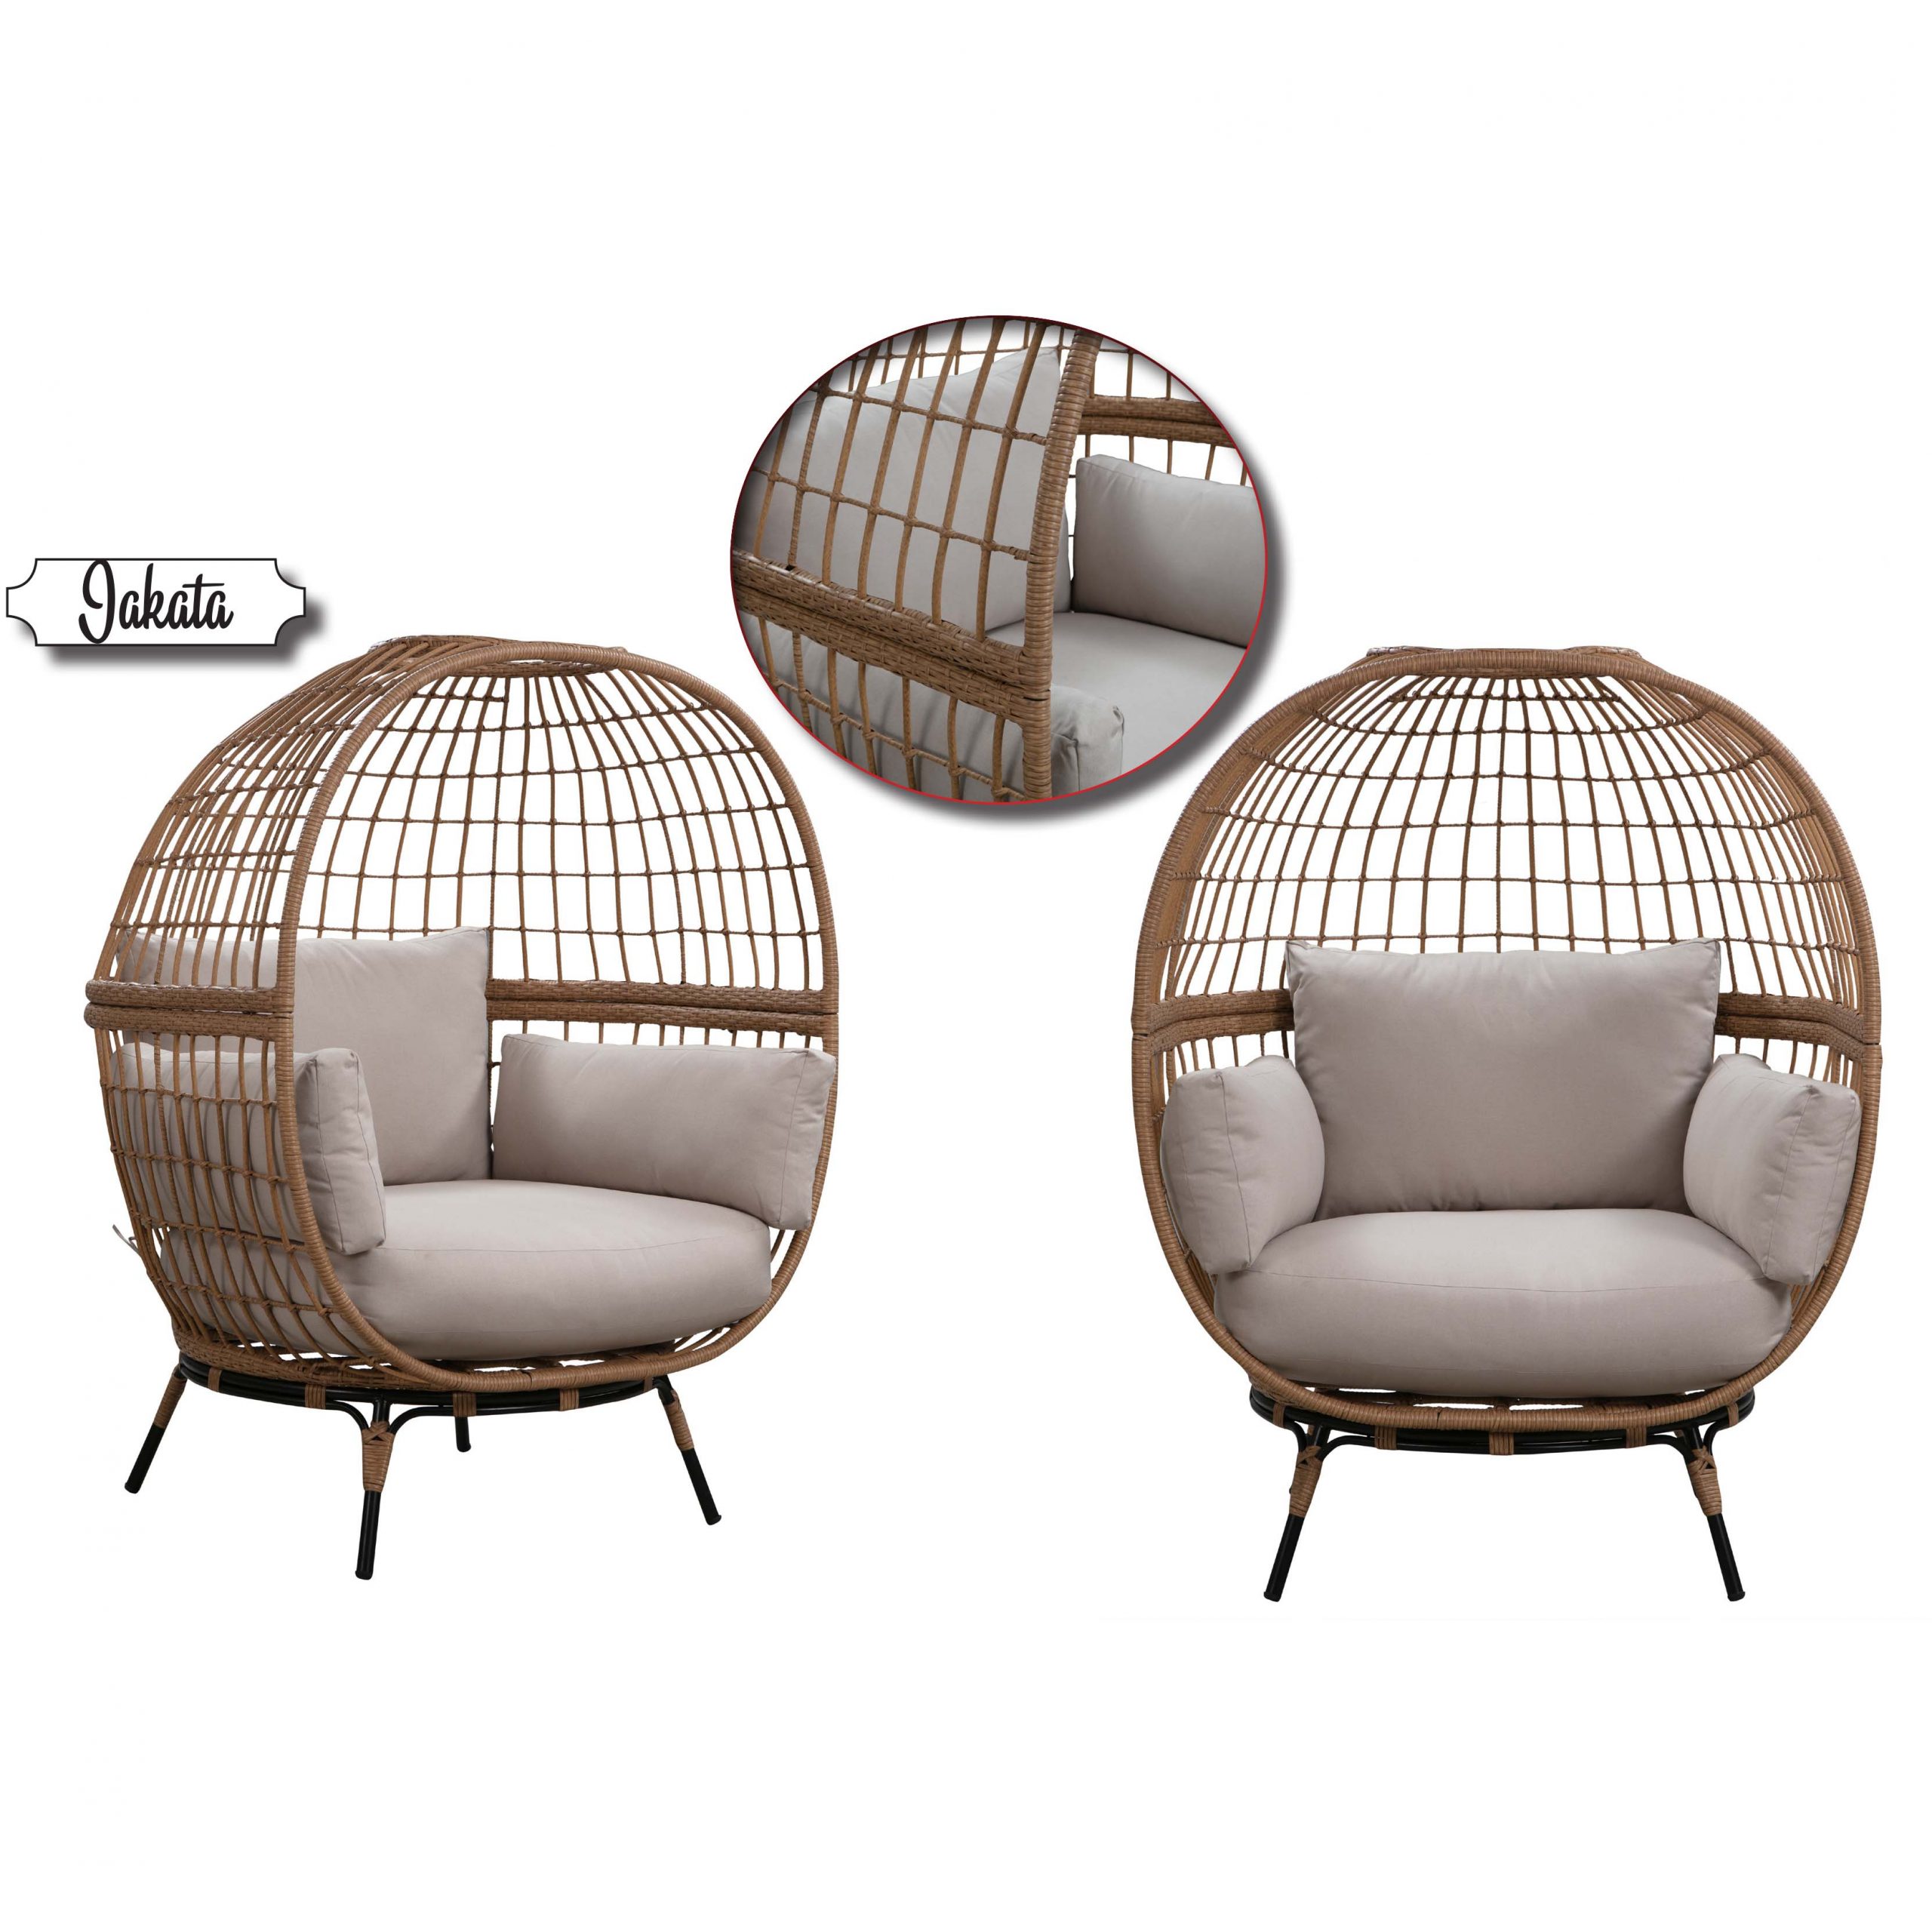 PE Wicker Egg Chair, Patio joy Oversized Indoor Outdoor Patio Lounge Chair with Cushions and Pillows, Steel Frame Basket Chair for Garden, Deck, Balcony, Living Room